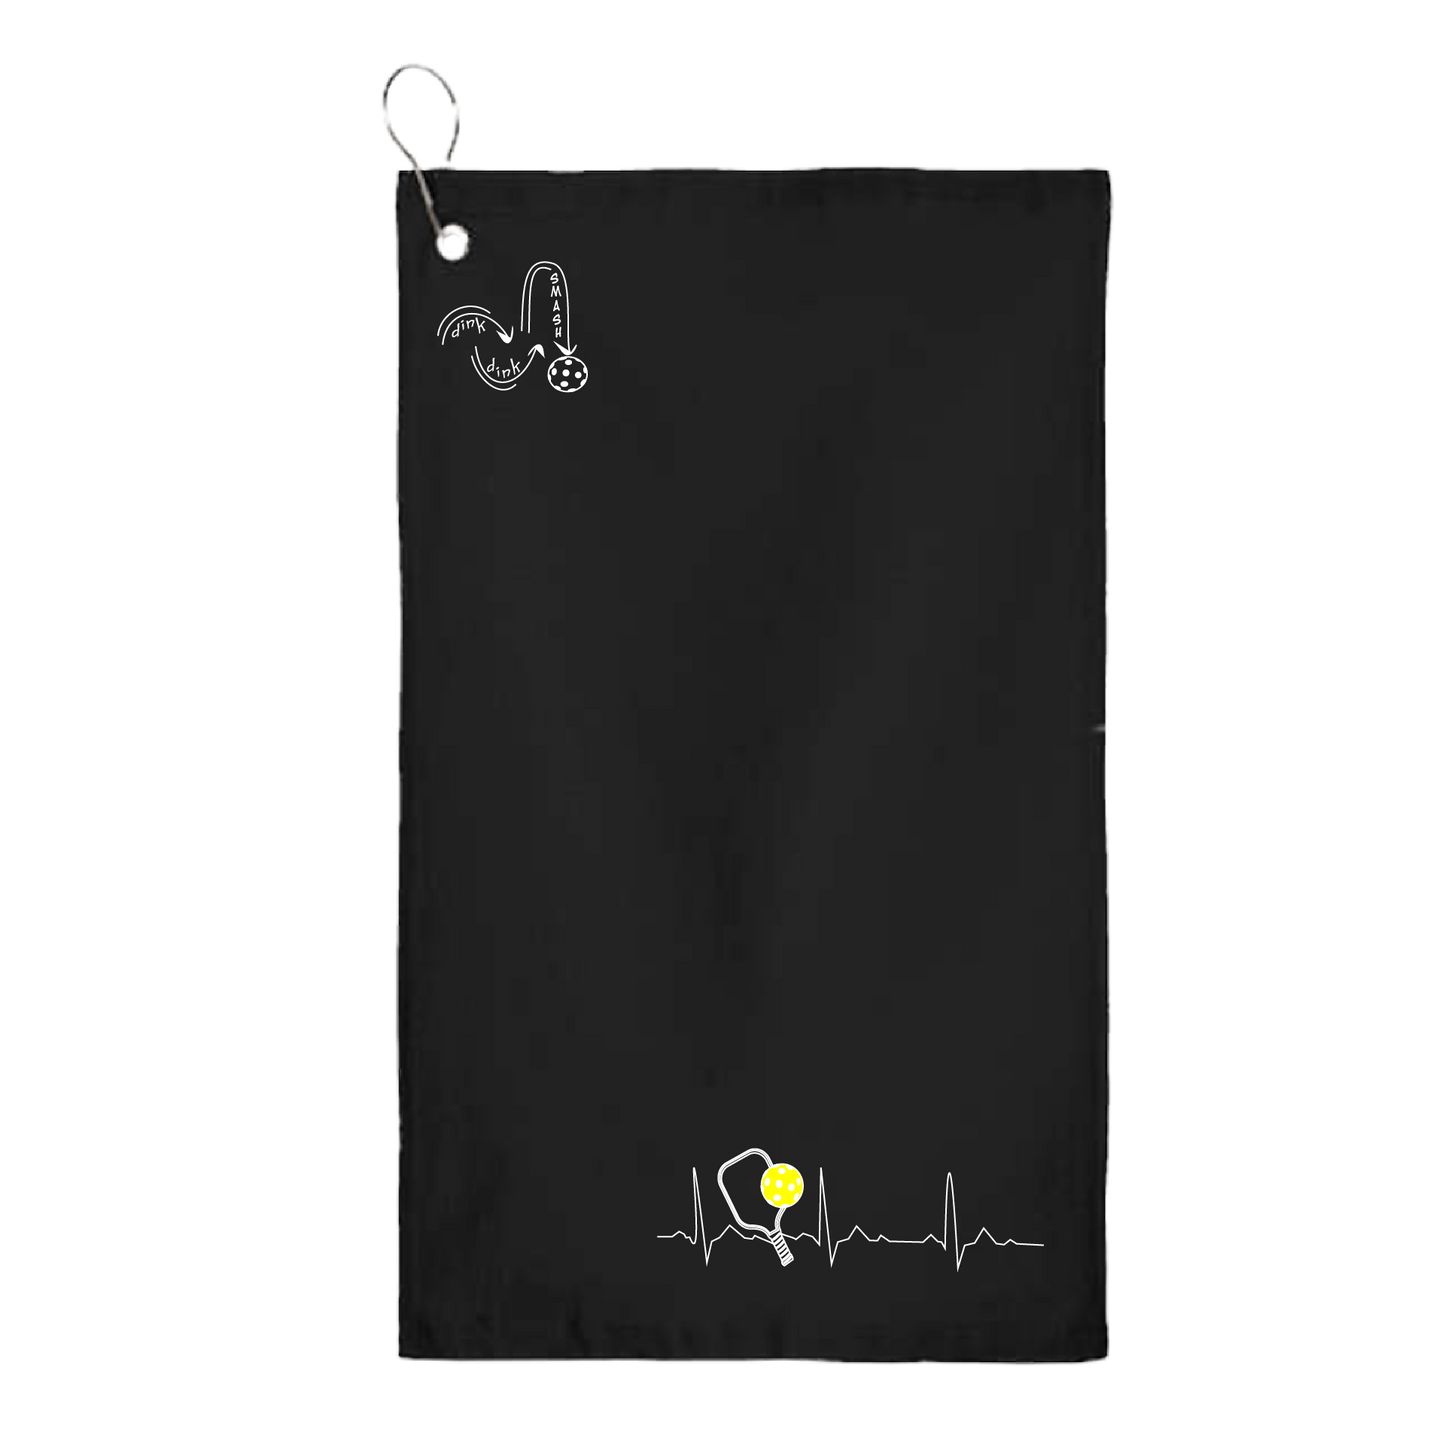 This Pickleball Heartbeat towel is crafted with cotton terry velour for optimal performance. It features grommets, hooks, and hemmed edges for added durability. It's perfect for completing your pickleball gear, and an ideal gift for friends and tournaments. The towel is designed to be both absorbent and lightweight, so you can remain dry and comfortable while you play.